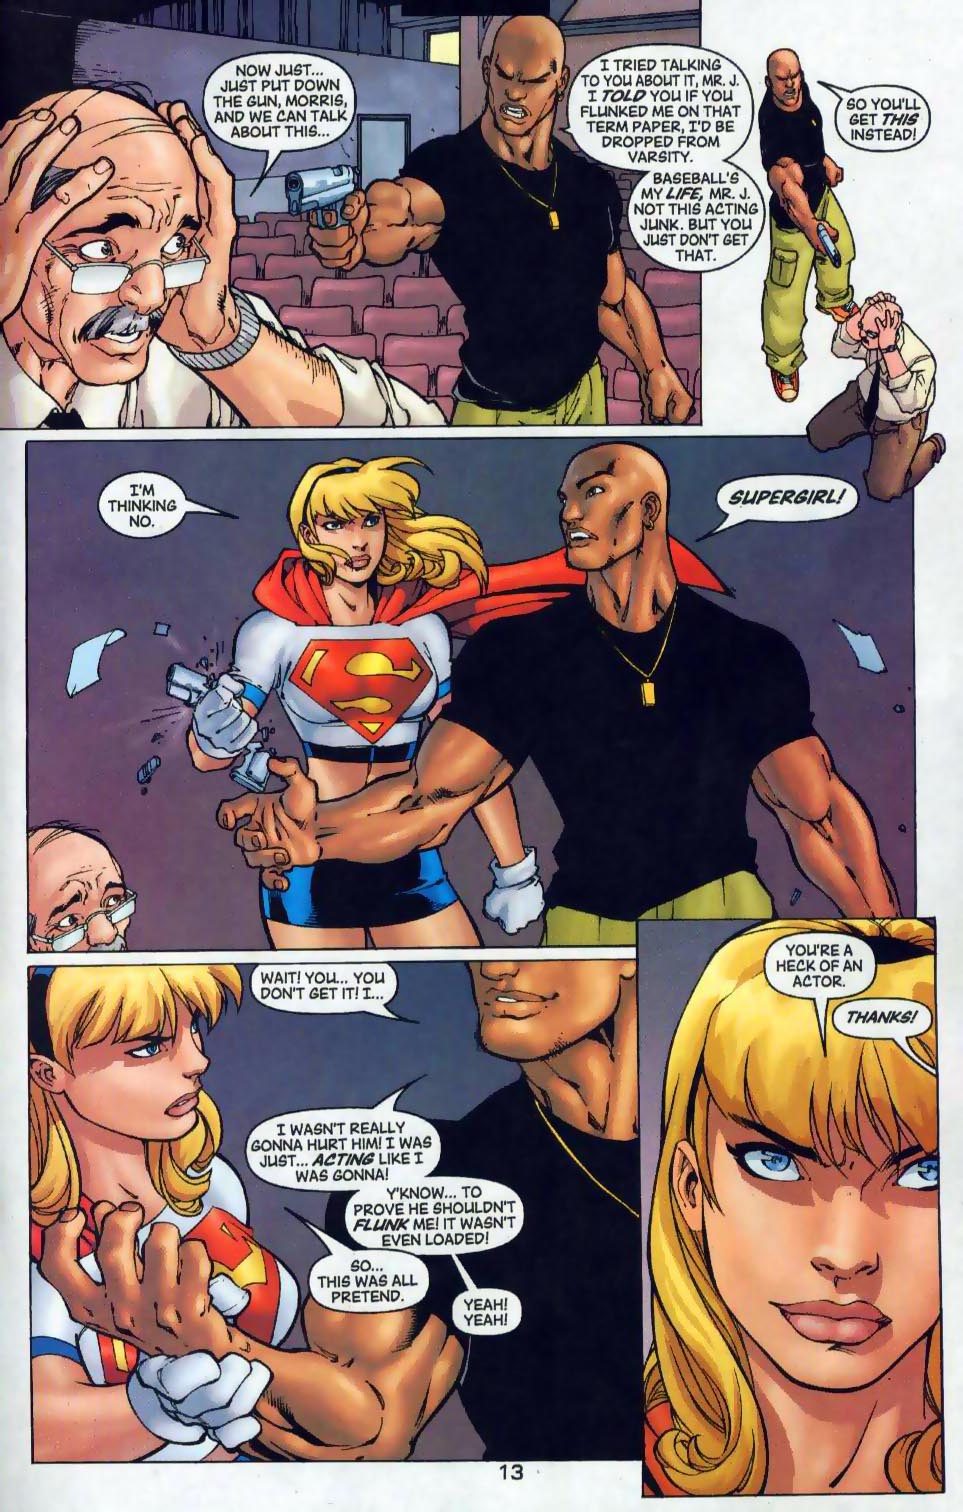 Supergirl (1996) 77 Page 13